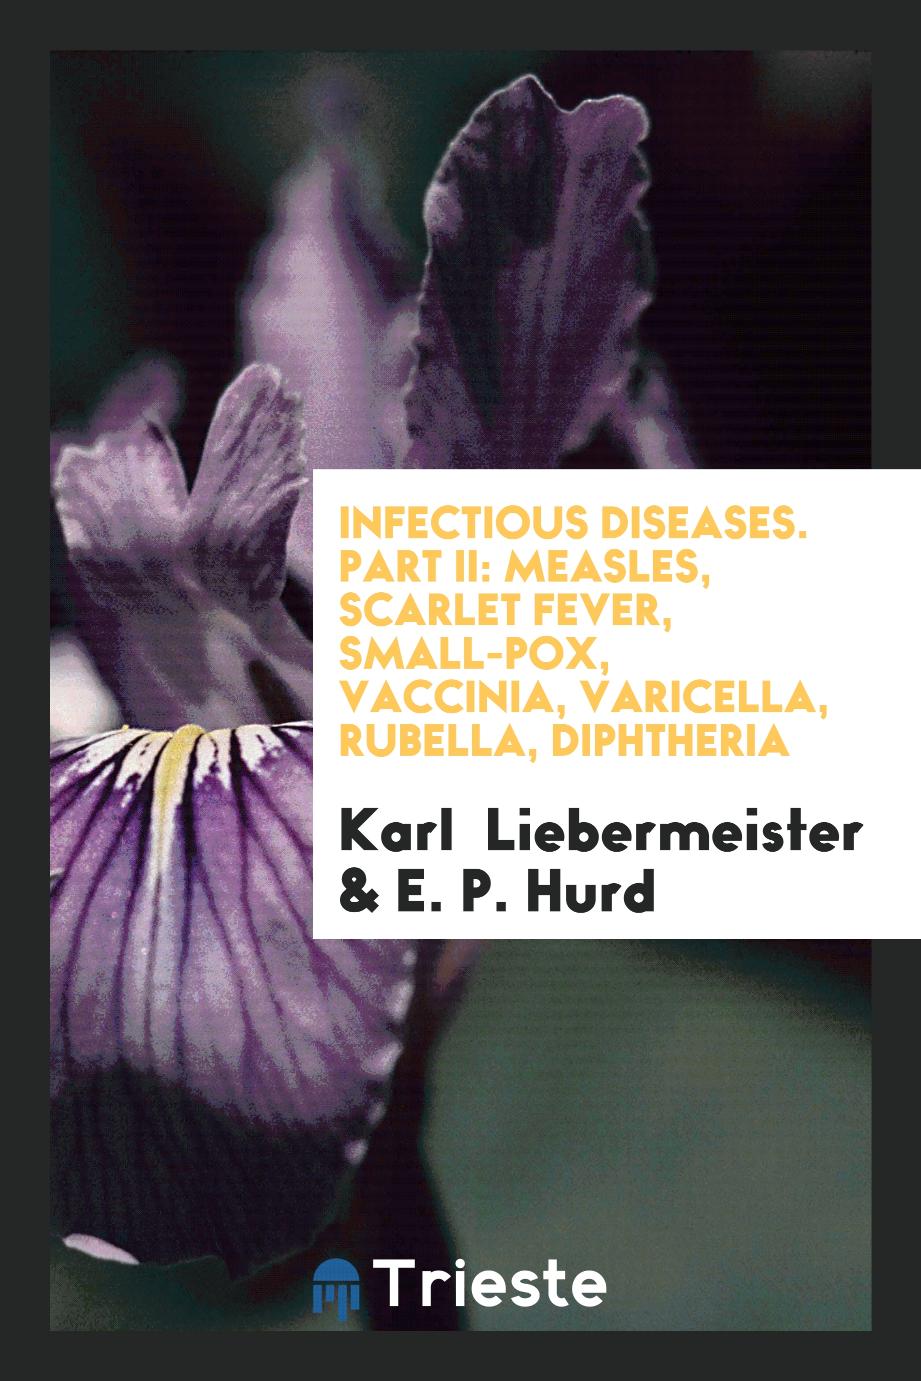 Infectious Diseases. Part II: Measles, Scarlet Fever, Small-Pox, Vaccinia, Varicella, Rubella, Diphtheria